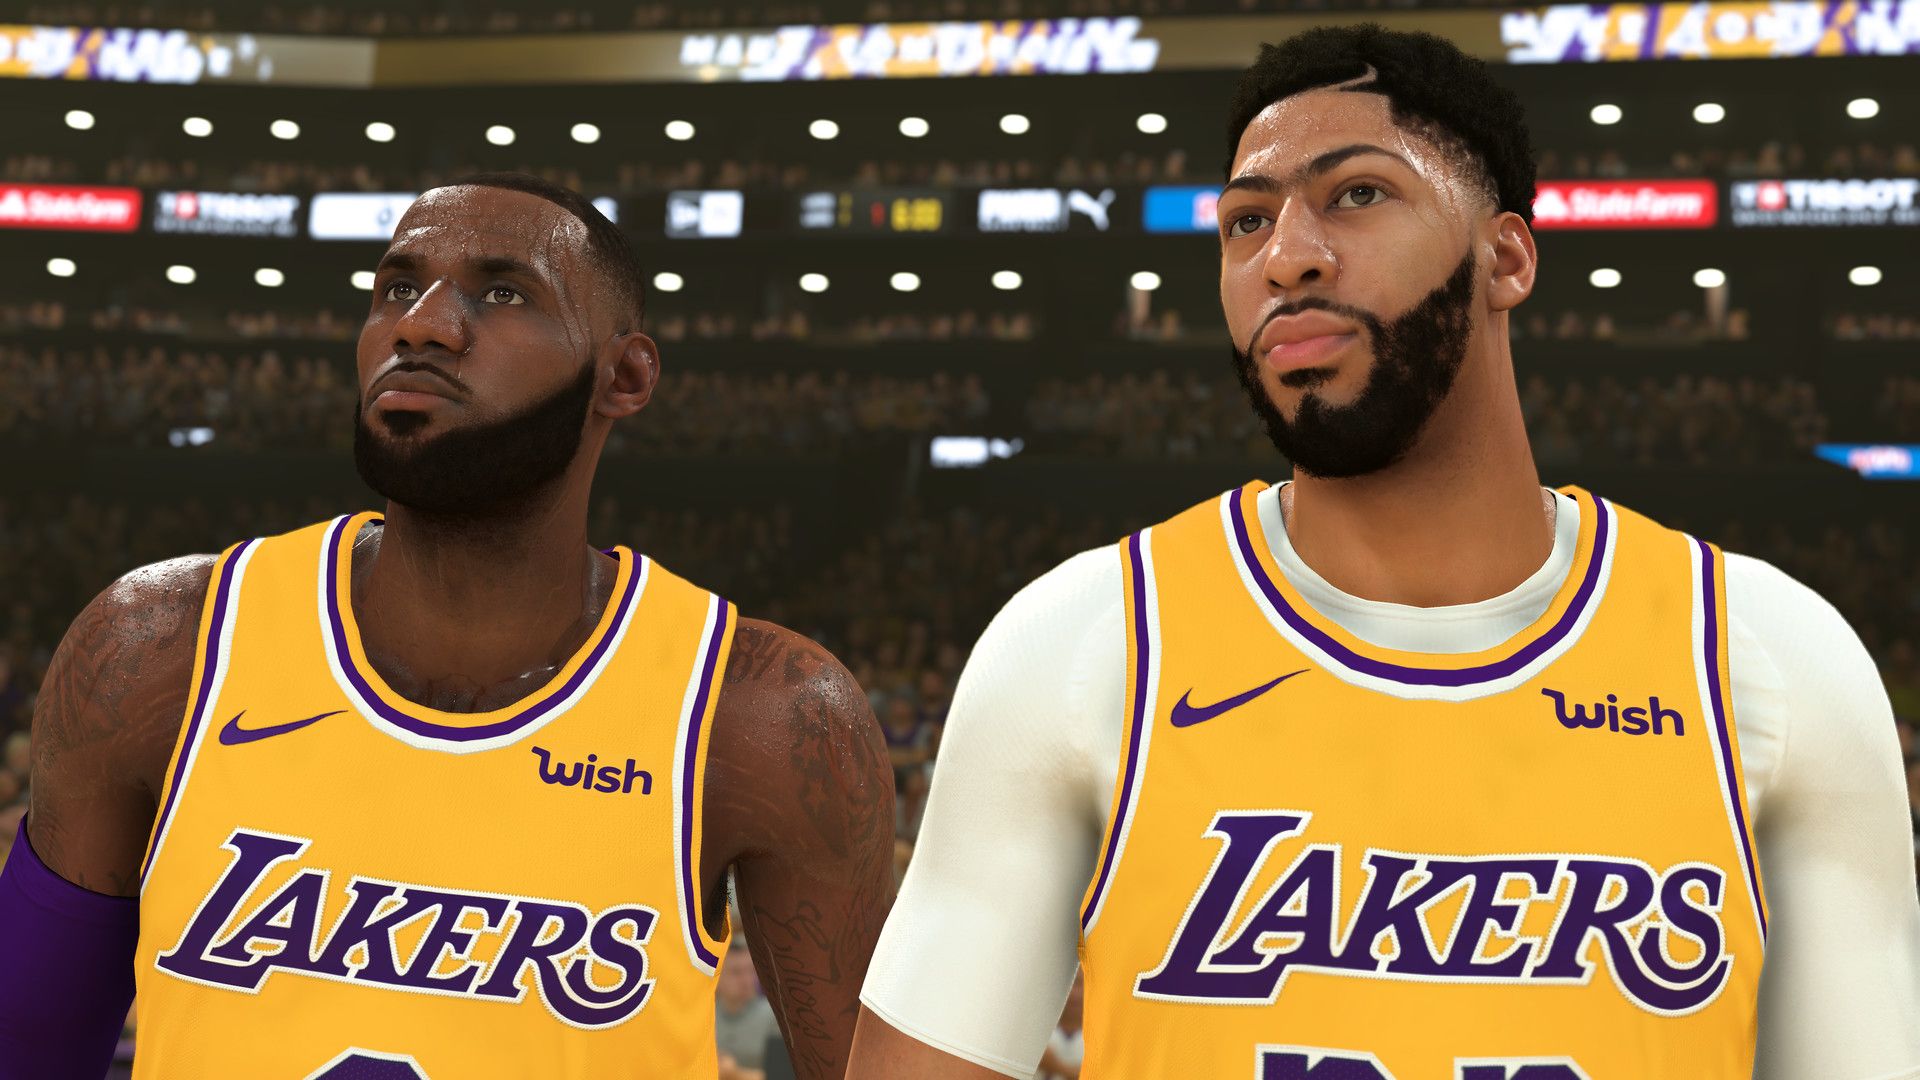 NBA 2K21 Release Date, Features: Basketball Game to Launch with Xbox Series X Console?